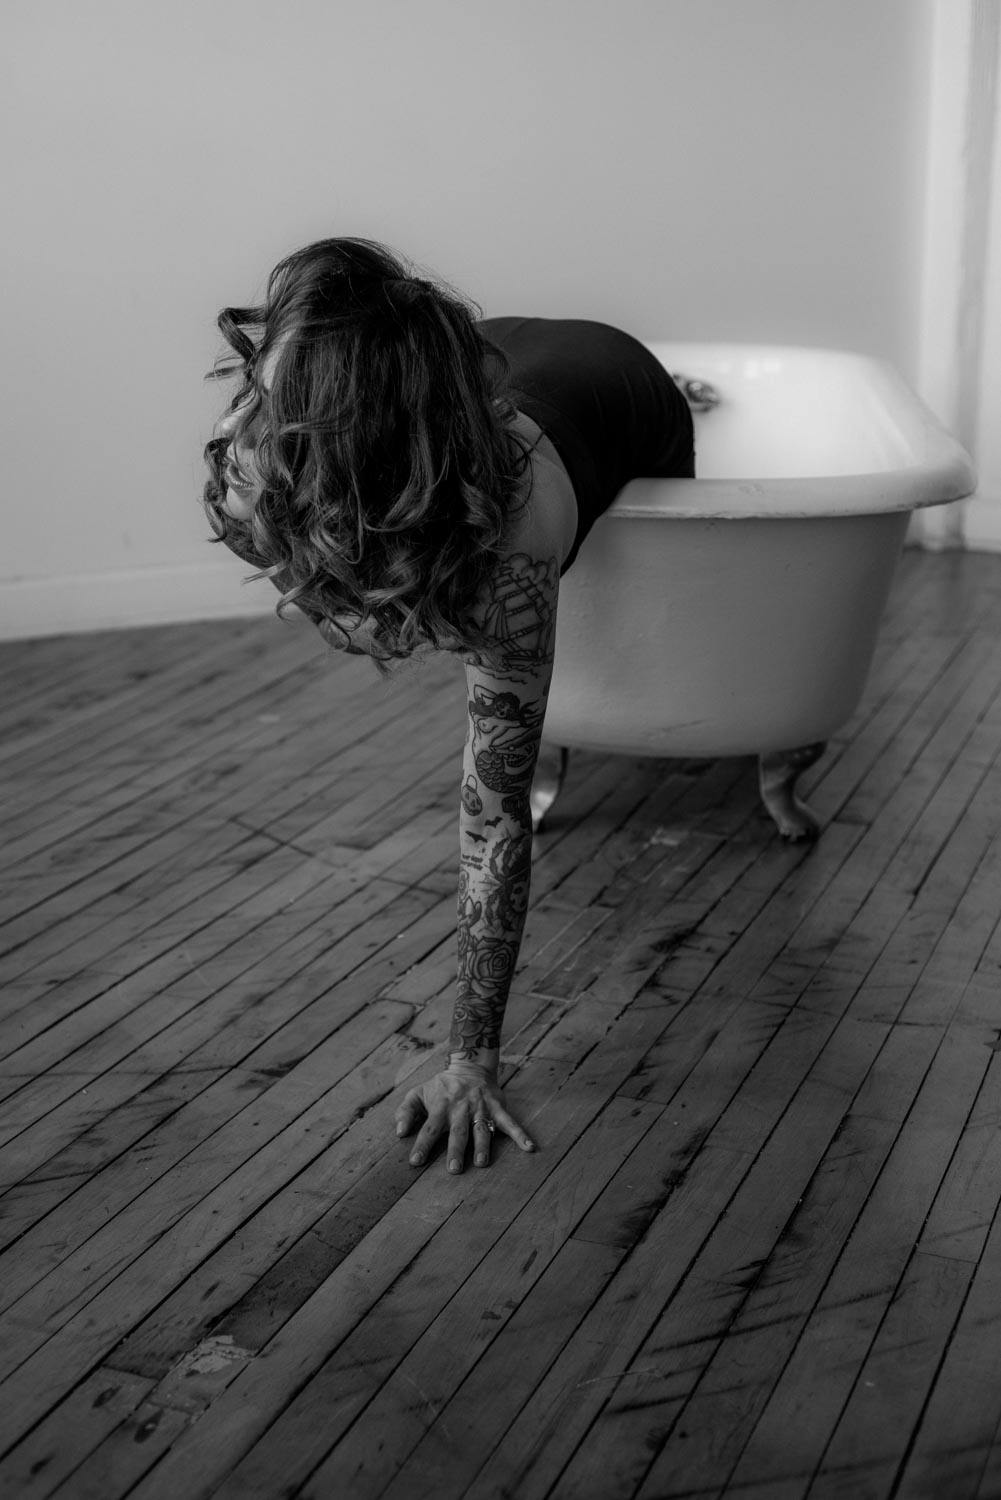 A black and white portrait of Christina crawling out of a claw foot bathtub sitting on a hardwood floor, she is holding herself up by a tattooed arm and is looking away from the camera with her hair over her face.